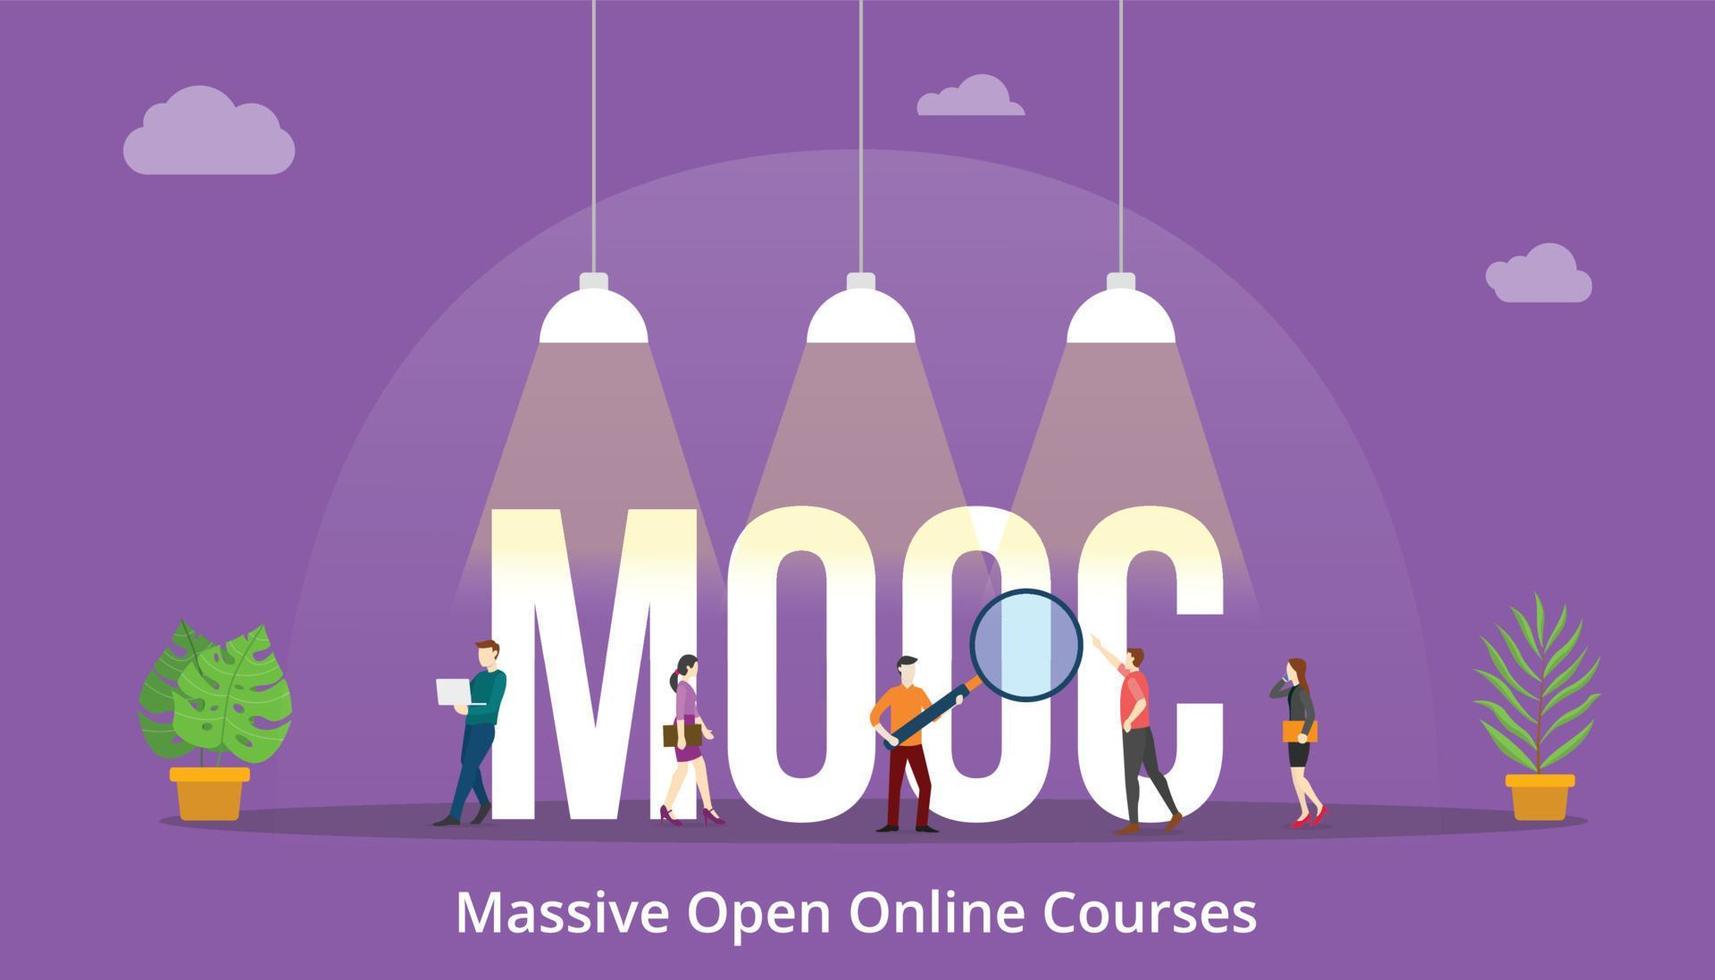 mooc massive open online course concept with big word text and people with modern flat style vector